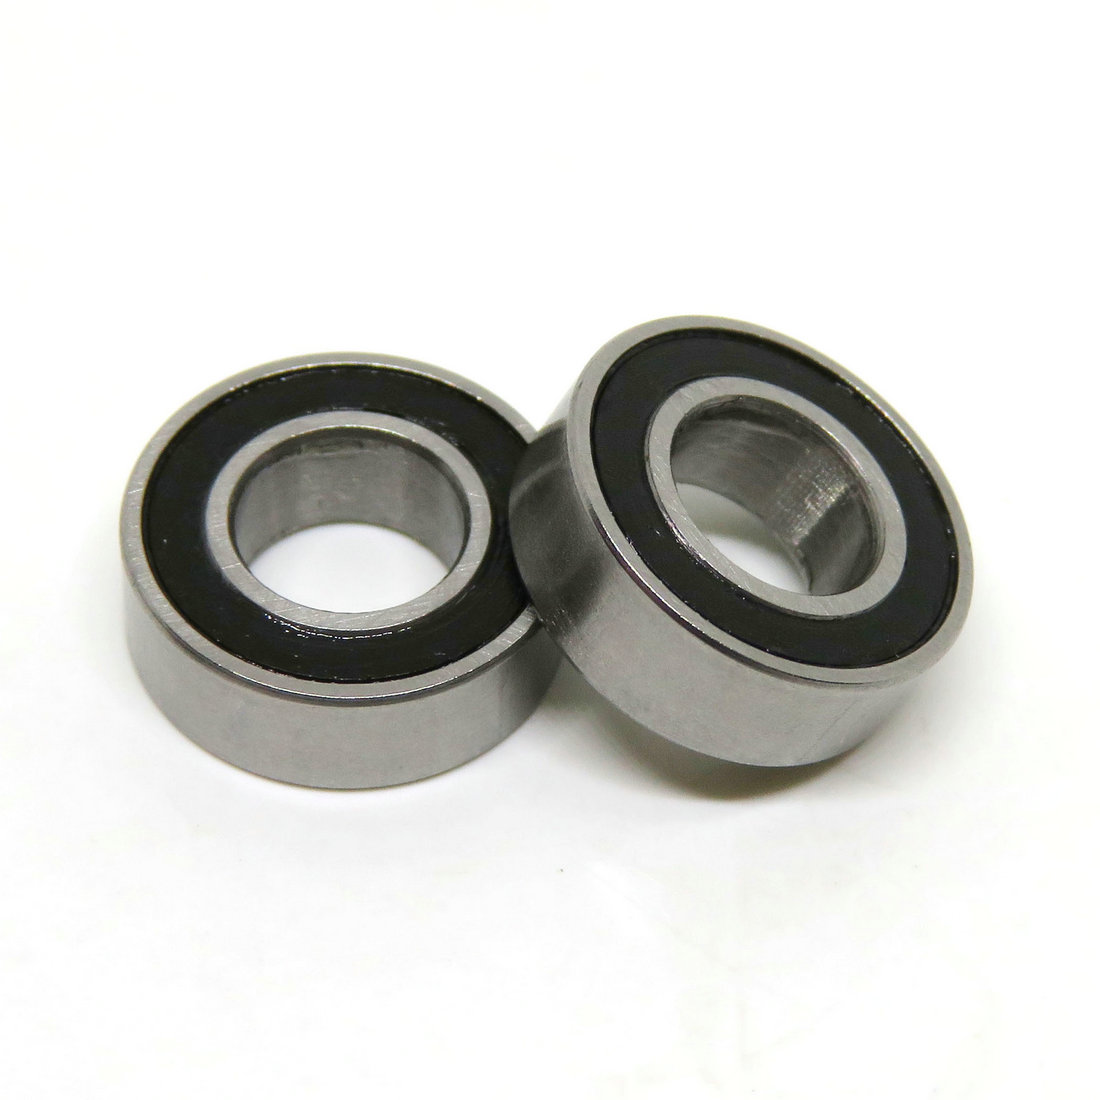 ABEC-3 MR126RS Bearing 6x12x4 mm MR126 - 2RS Miniature Ball Bearings Black Sealed For Axial.jpg